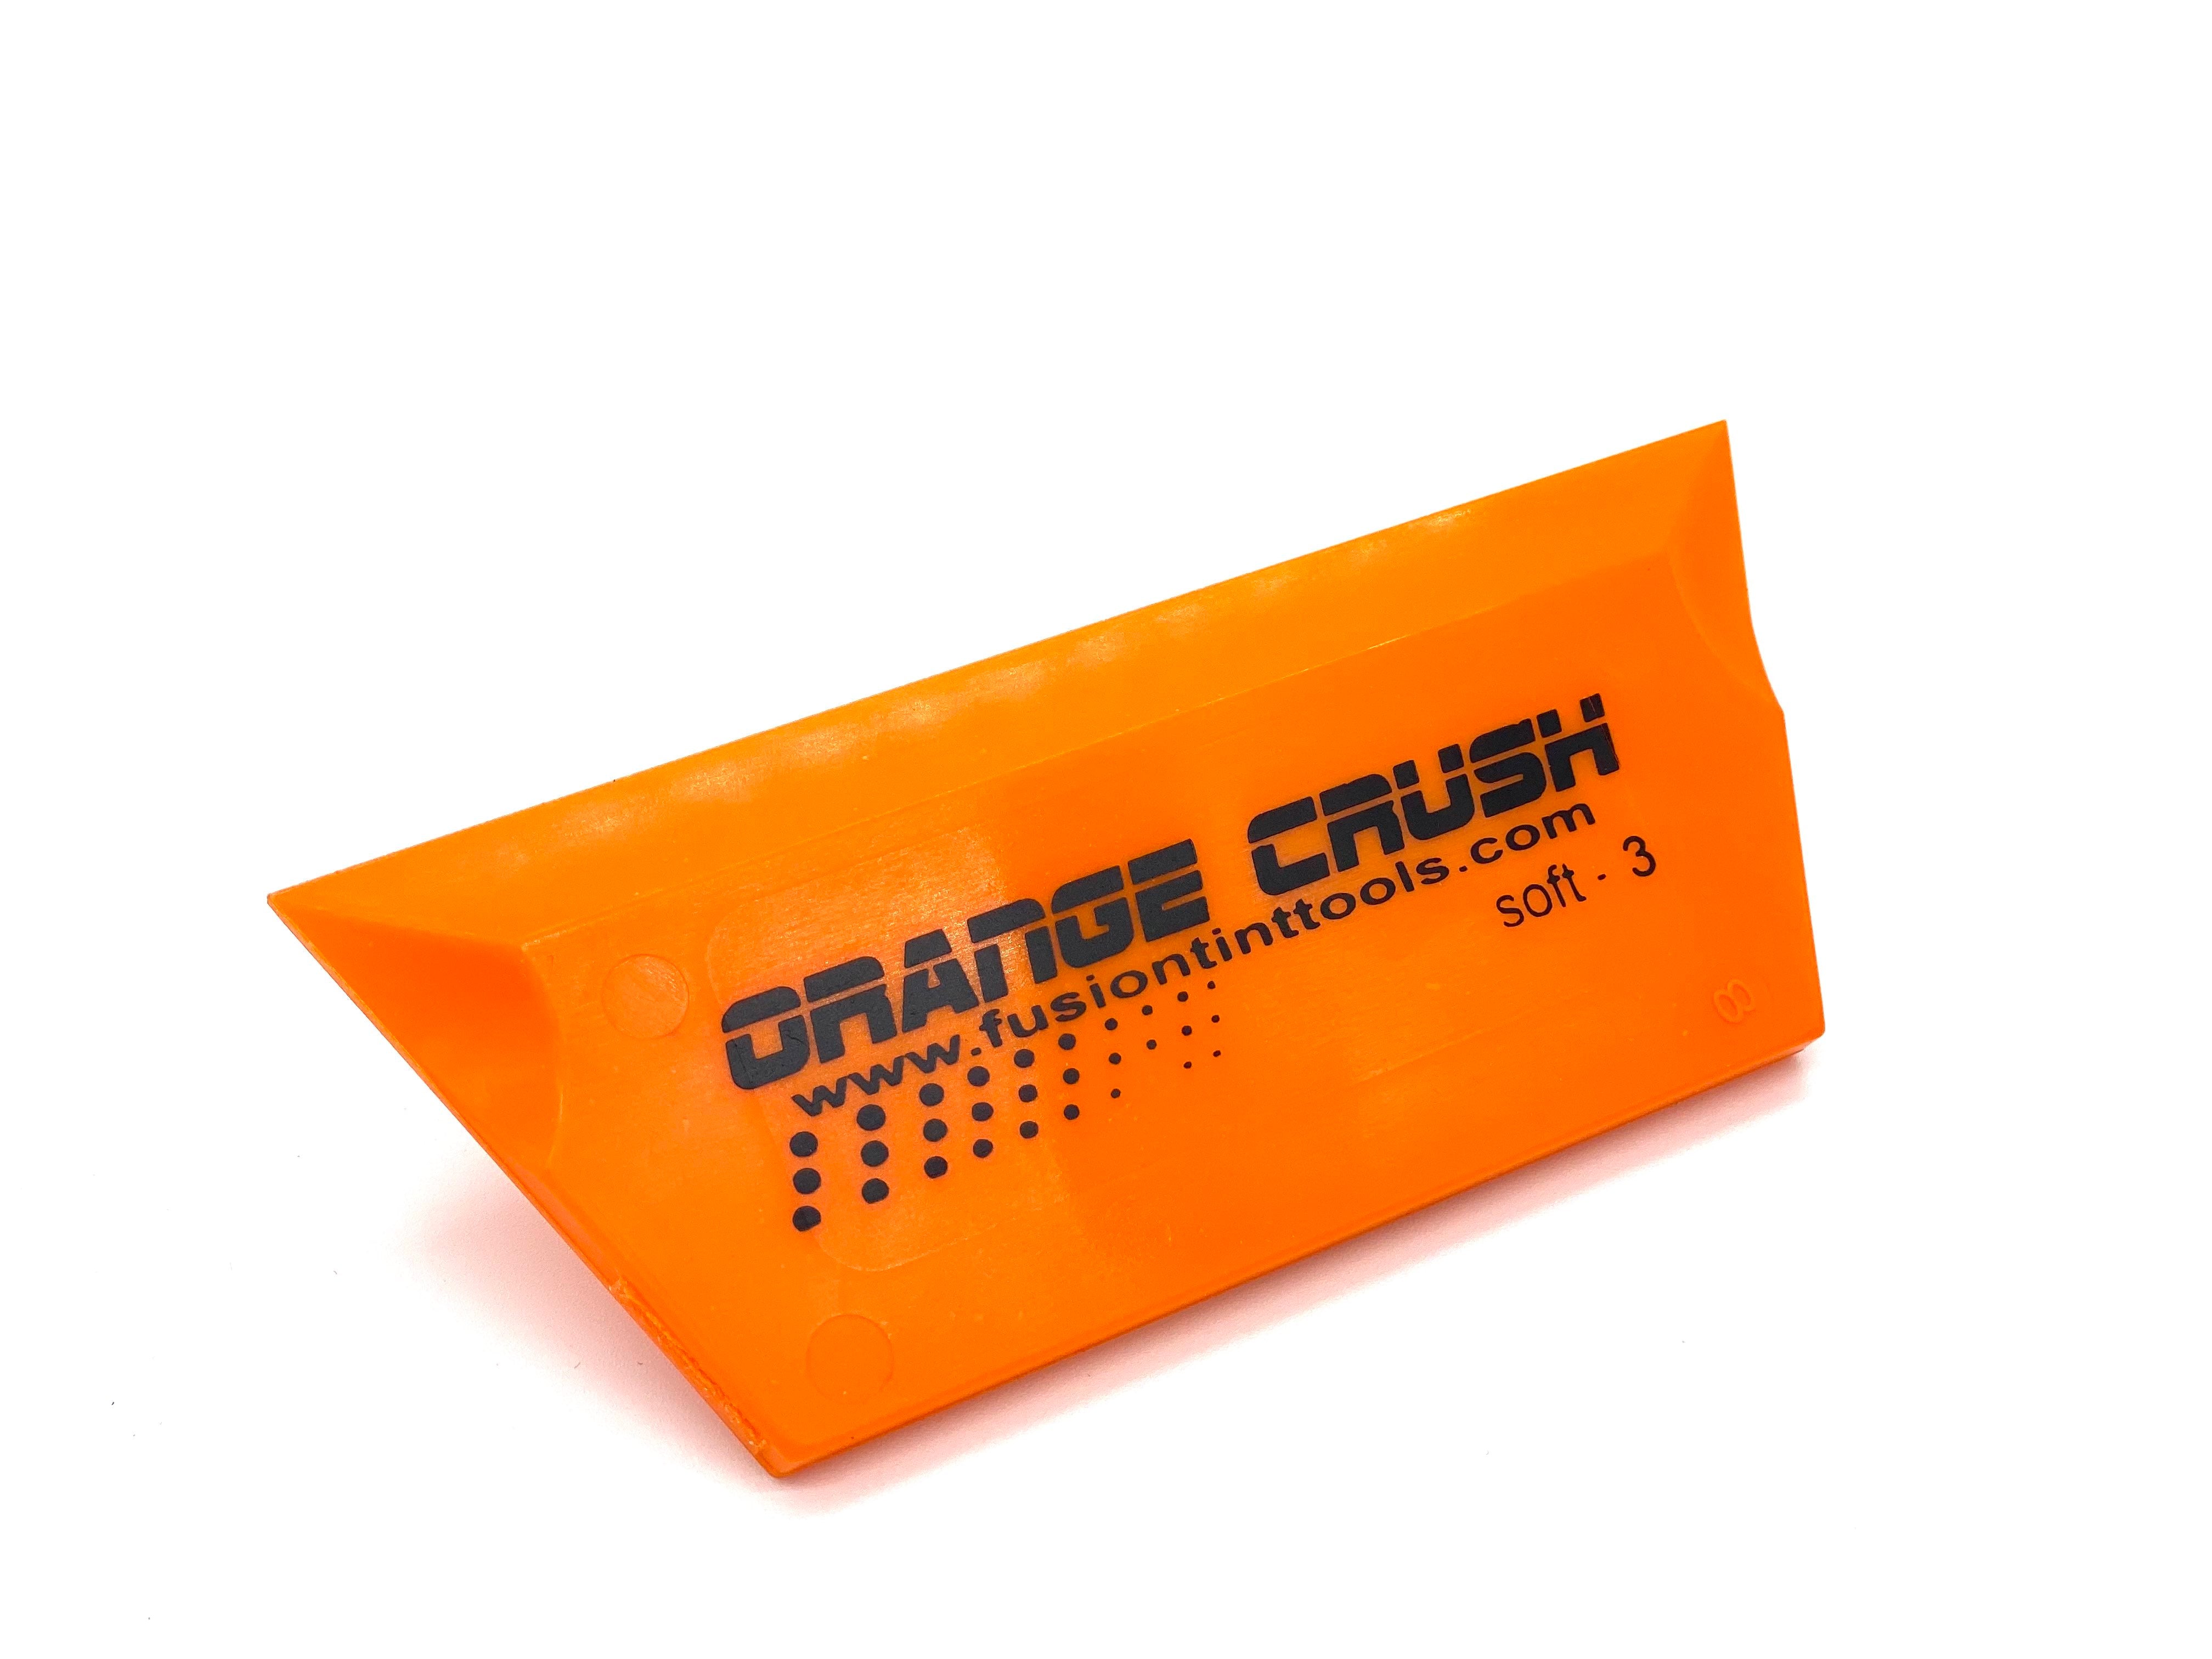 Fusion Orange Crush - 5" squeegee displayed, showcasing its vibrant orange color and durable design for window tinting.